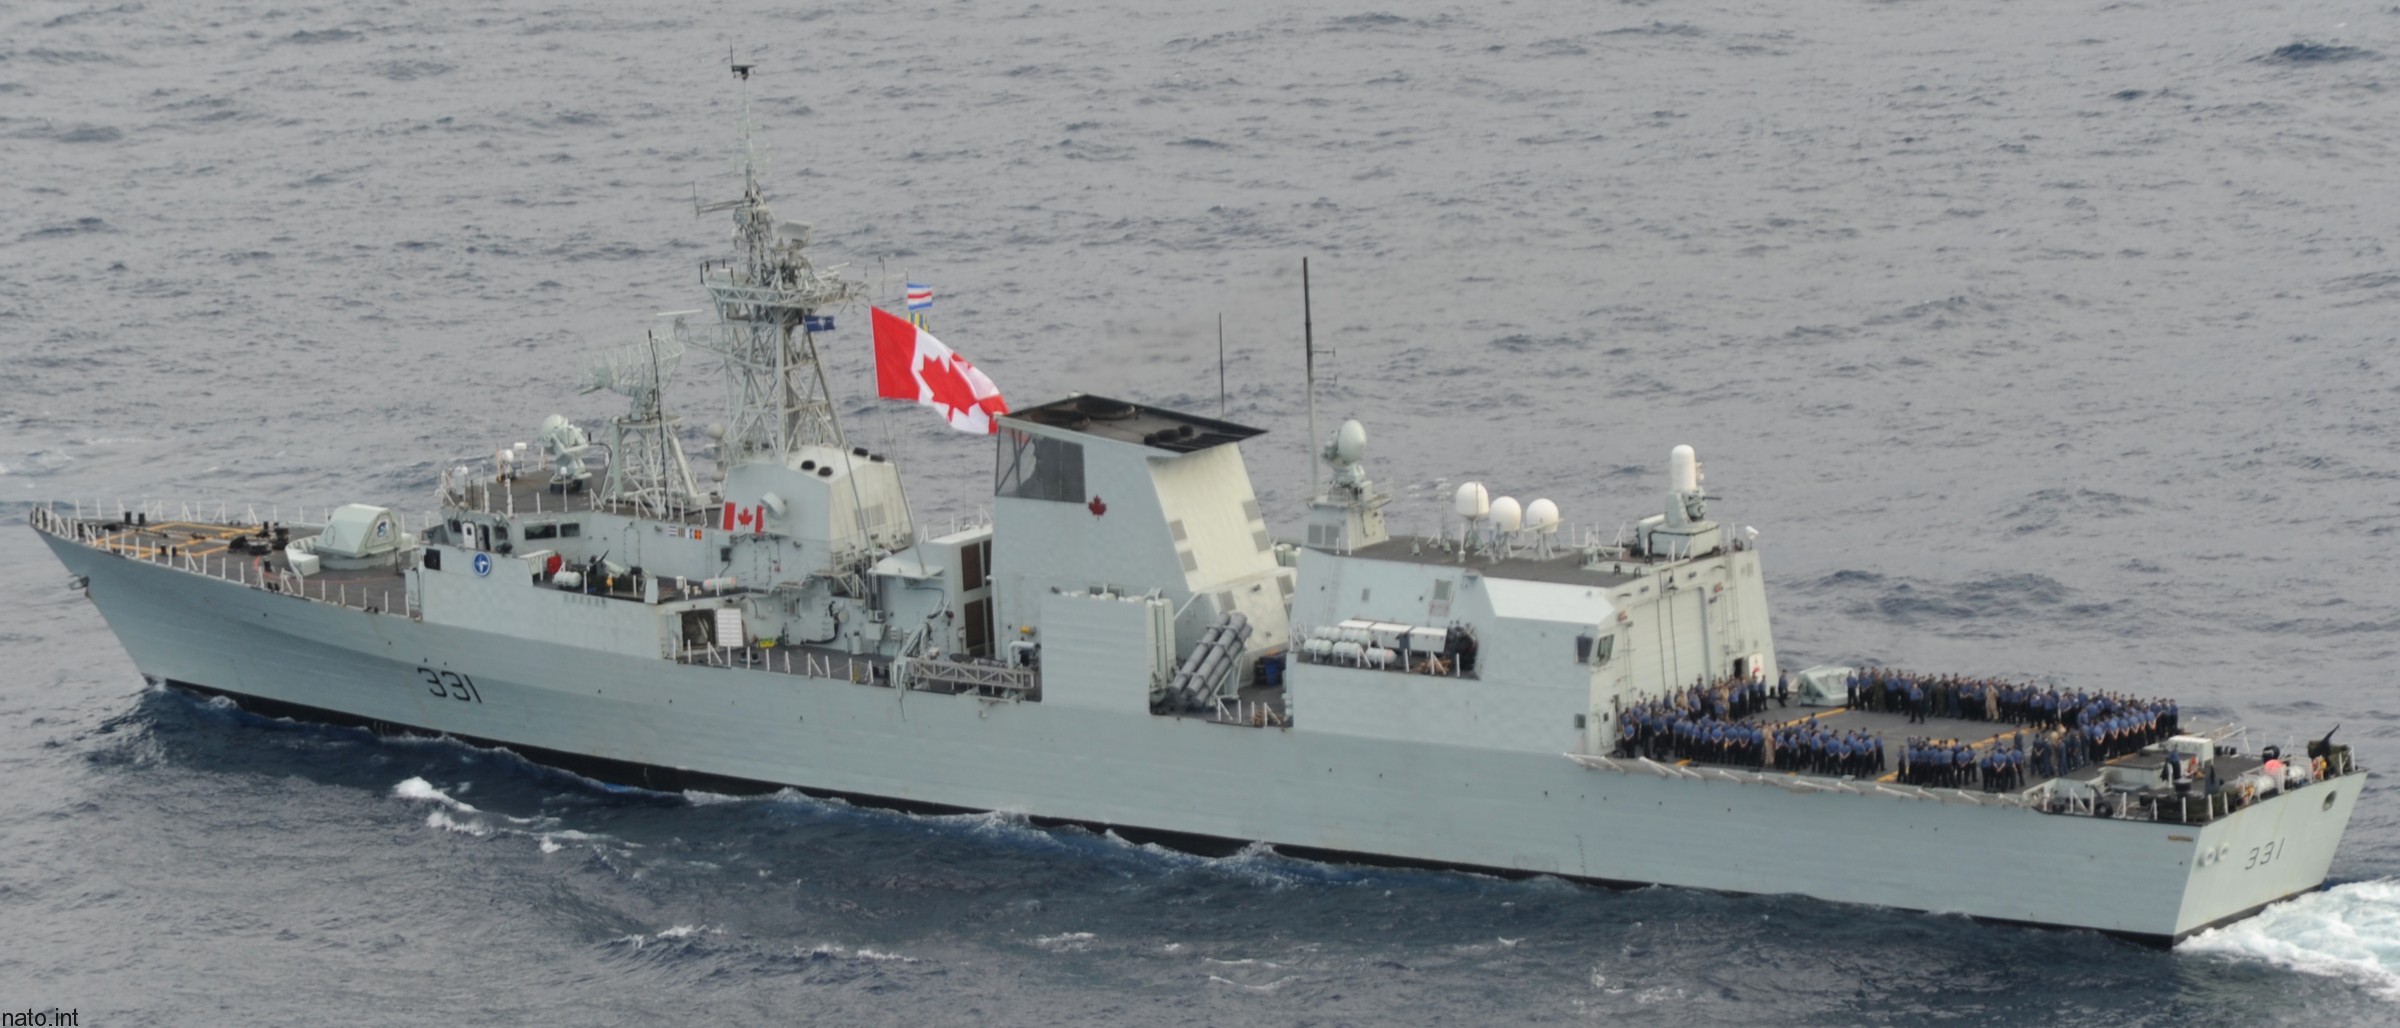 ffh-331 hmcs vancouver halifax class helicopter patrol frigate ncsm royal canadian navy 35